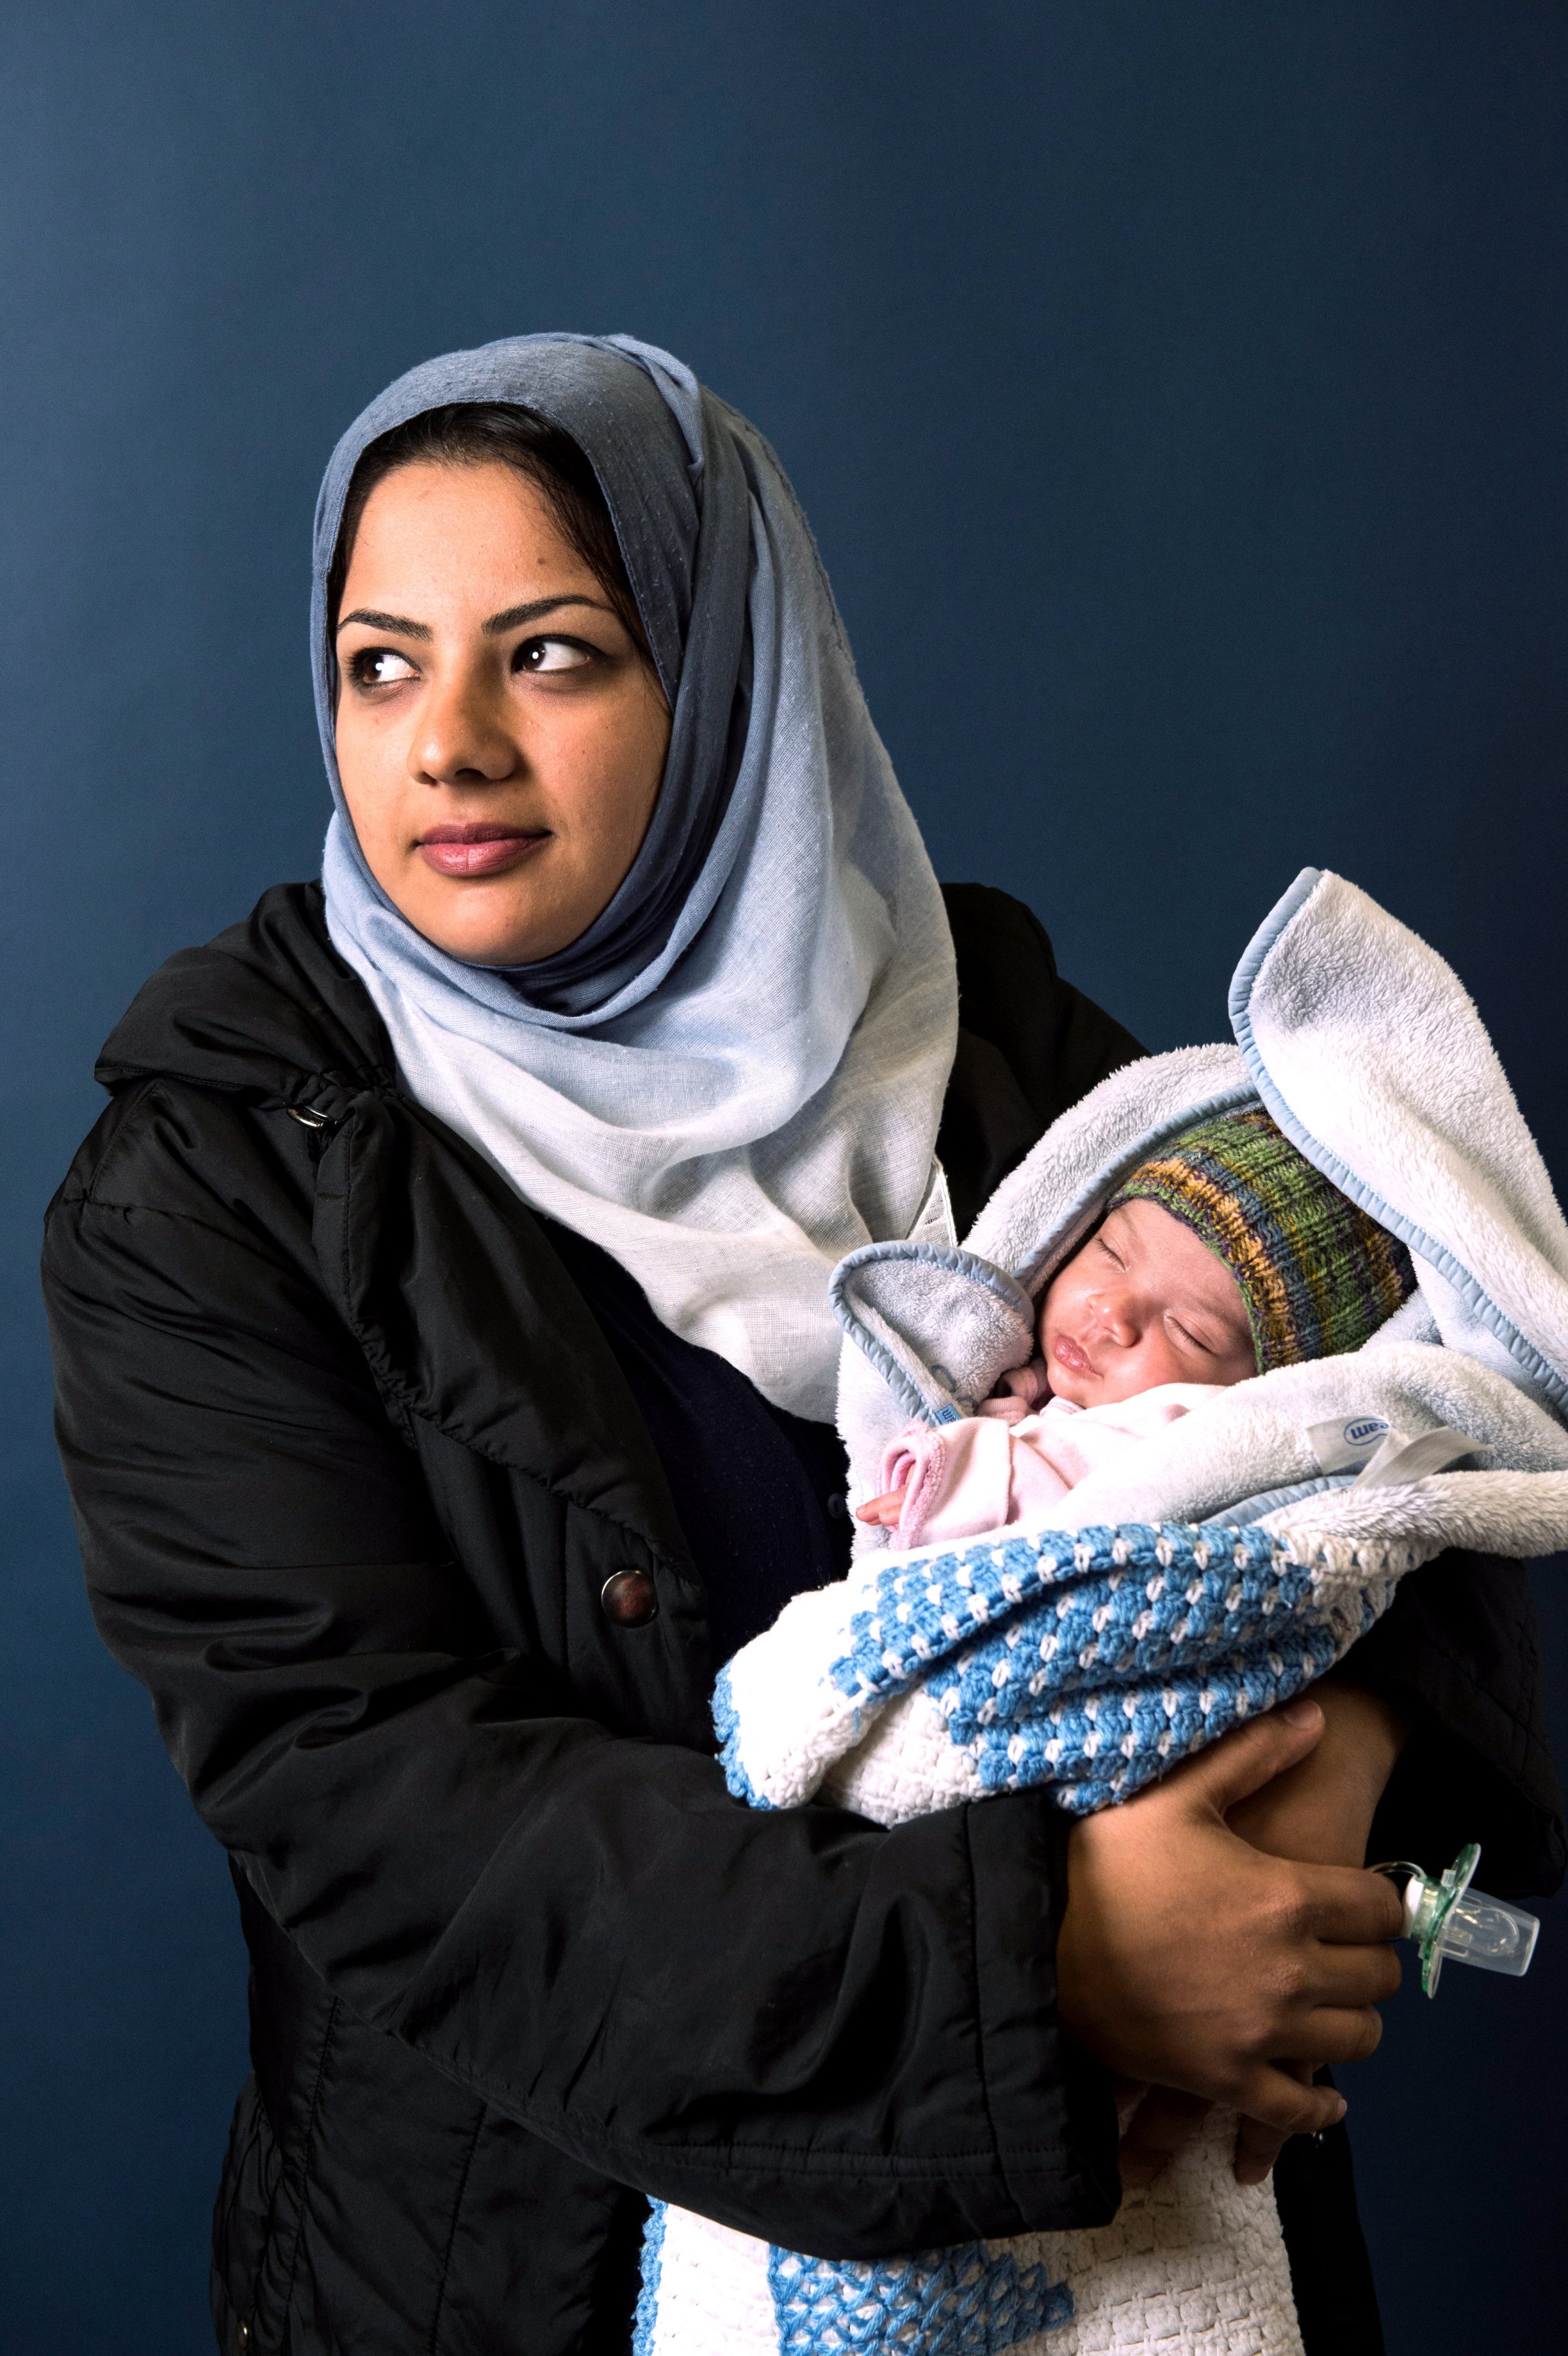 Hind Almahdawi, from Bagdad, poses with her infant daughter, Angela in Sarstedt, Germany on Nov. 4, 2015.